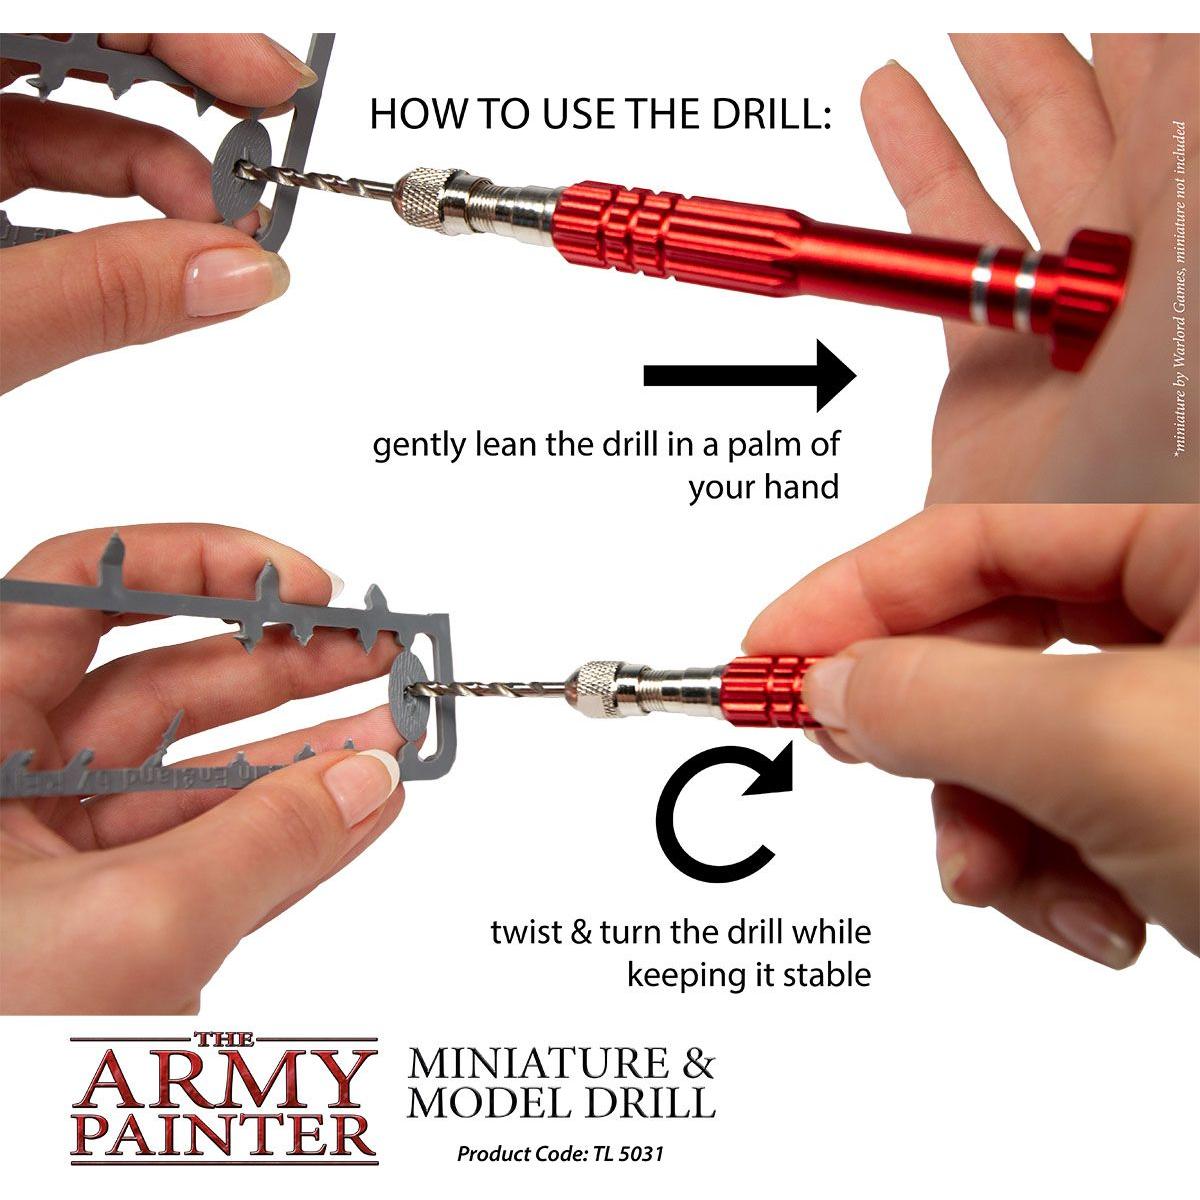 The Army Painter - Miniature & Model Drill